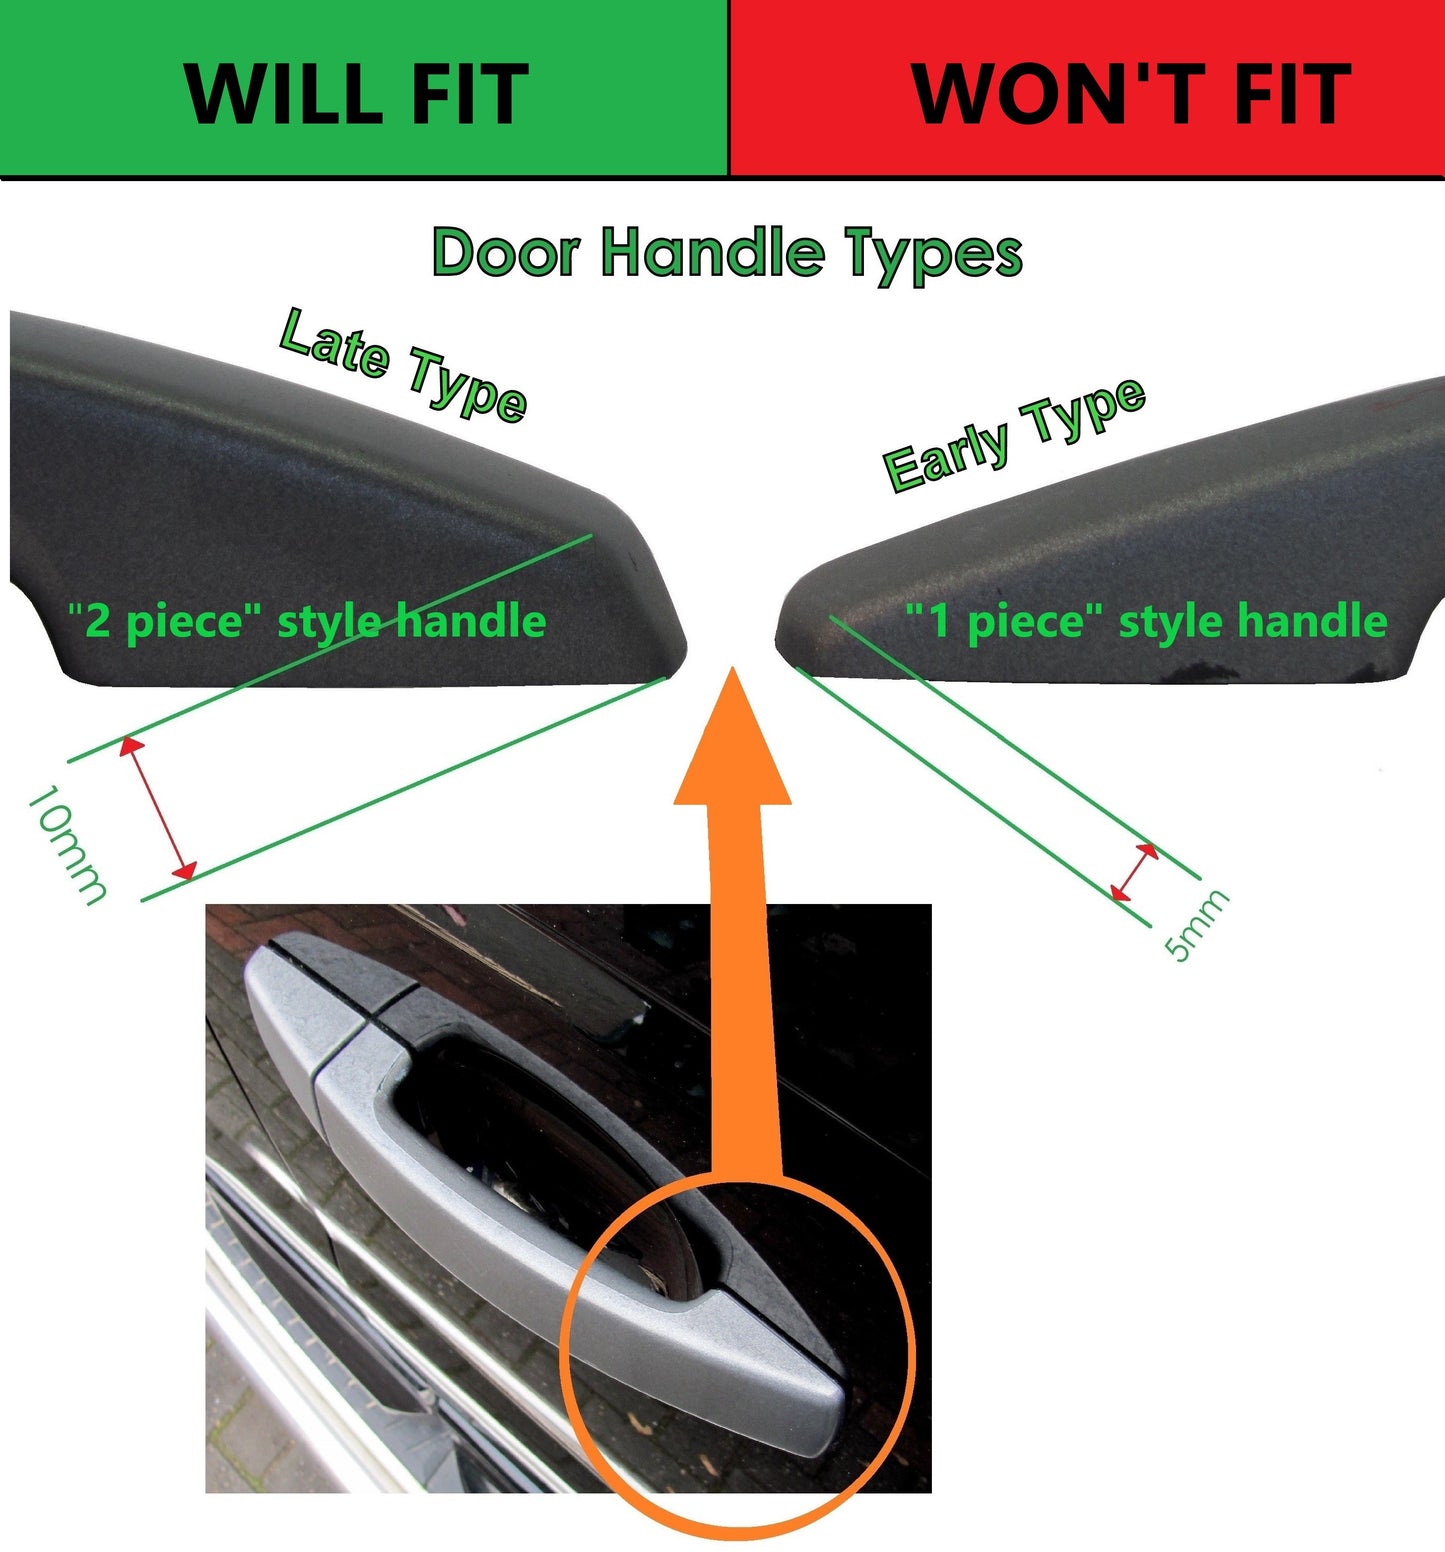 Door Handle "Skins" for Land Rover Discovery 3 fitted with 2 pc Handle - Zermatt Silver